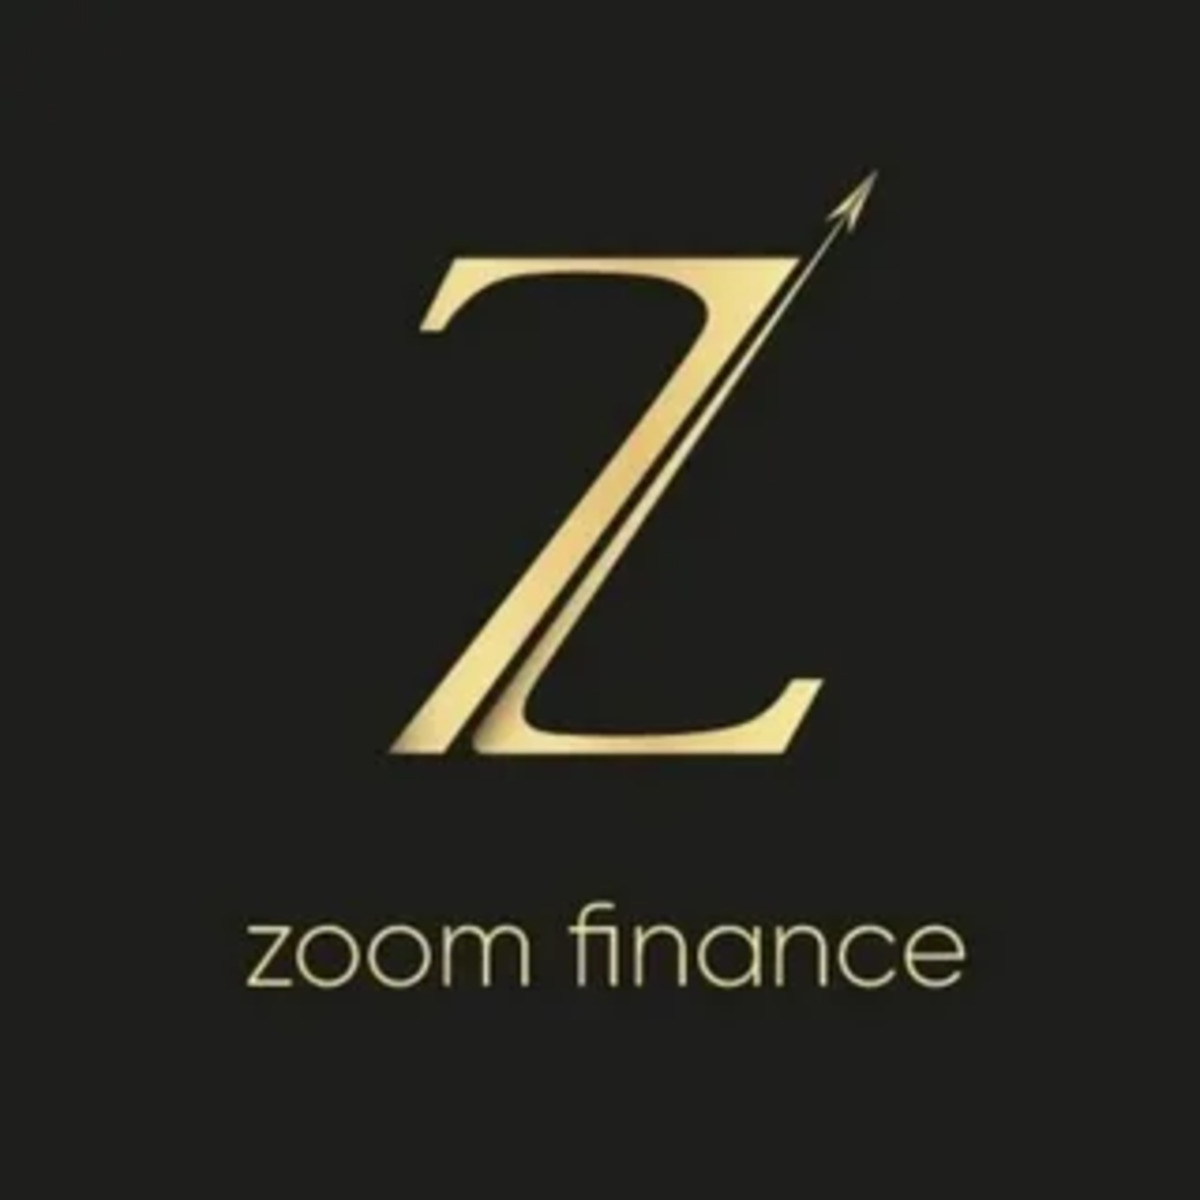 Find Zoom Finance: ZM Zoom Video Communications Stock Price